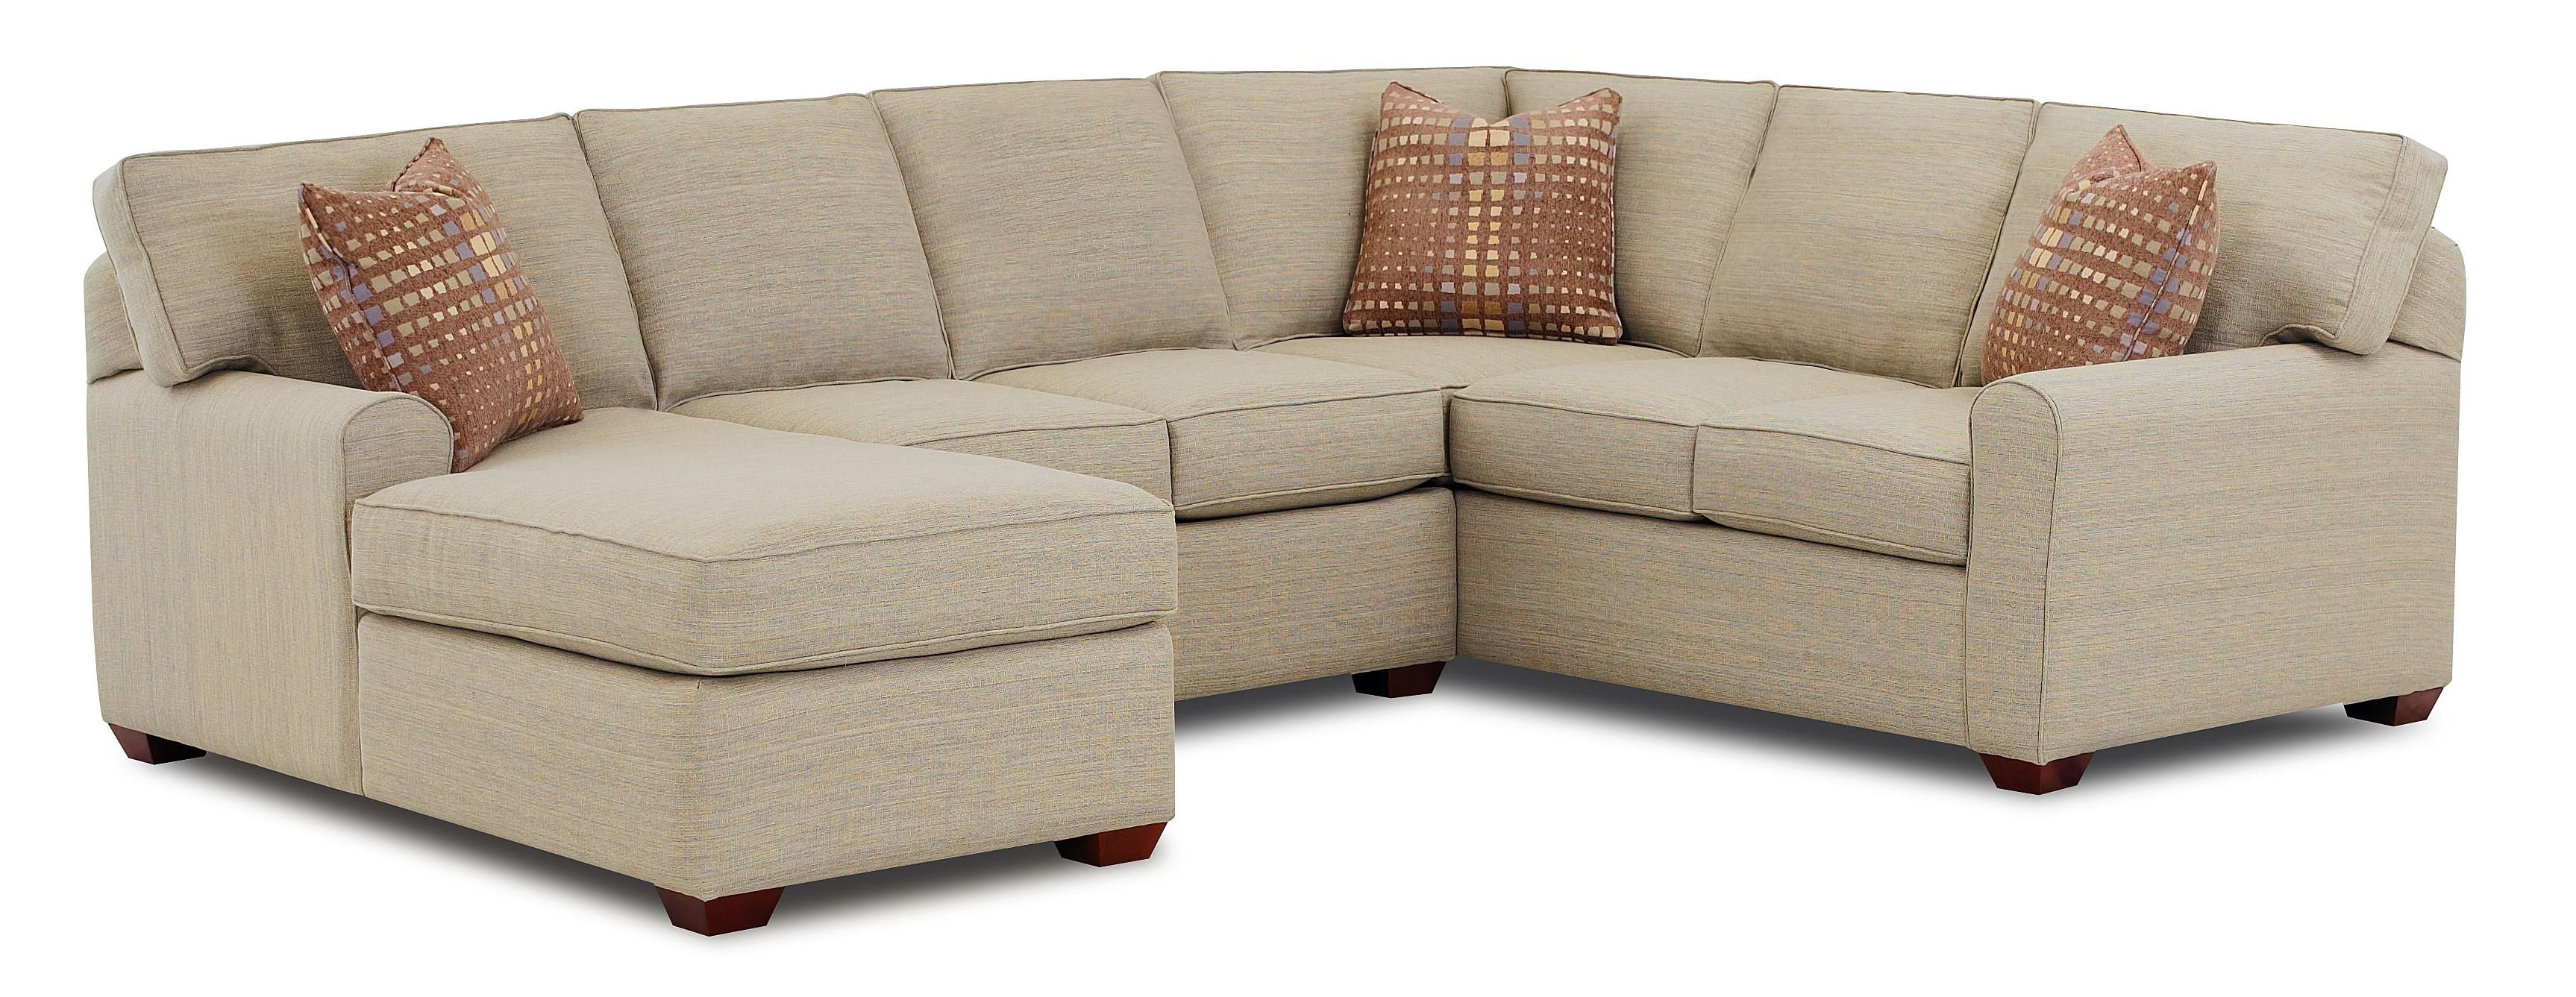 Sofas Center Sofa With Chaise Loungeleeper Attached Grey In Inside Richmond Sofas (View 12 of 15)